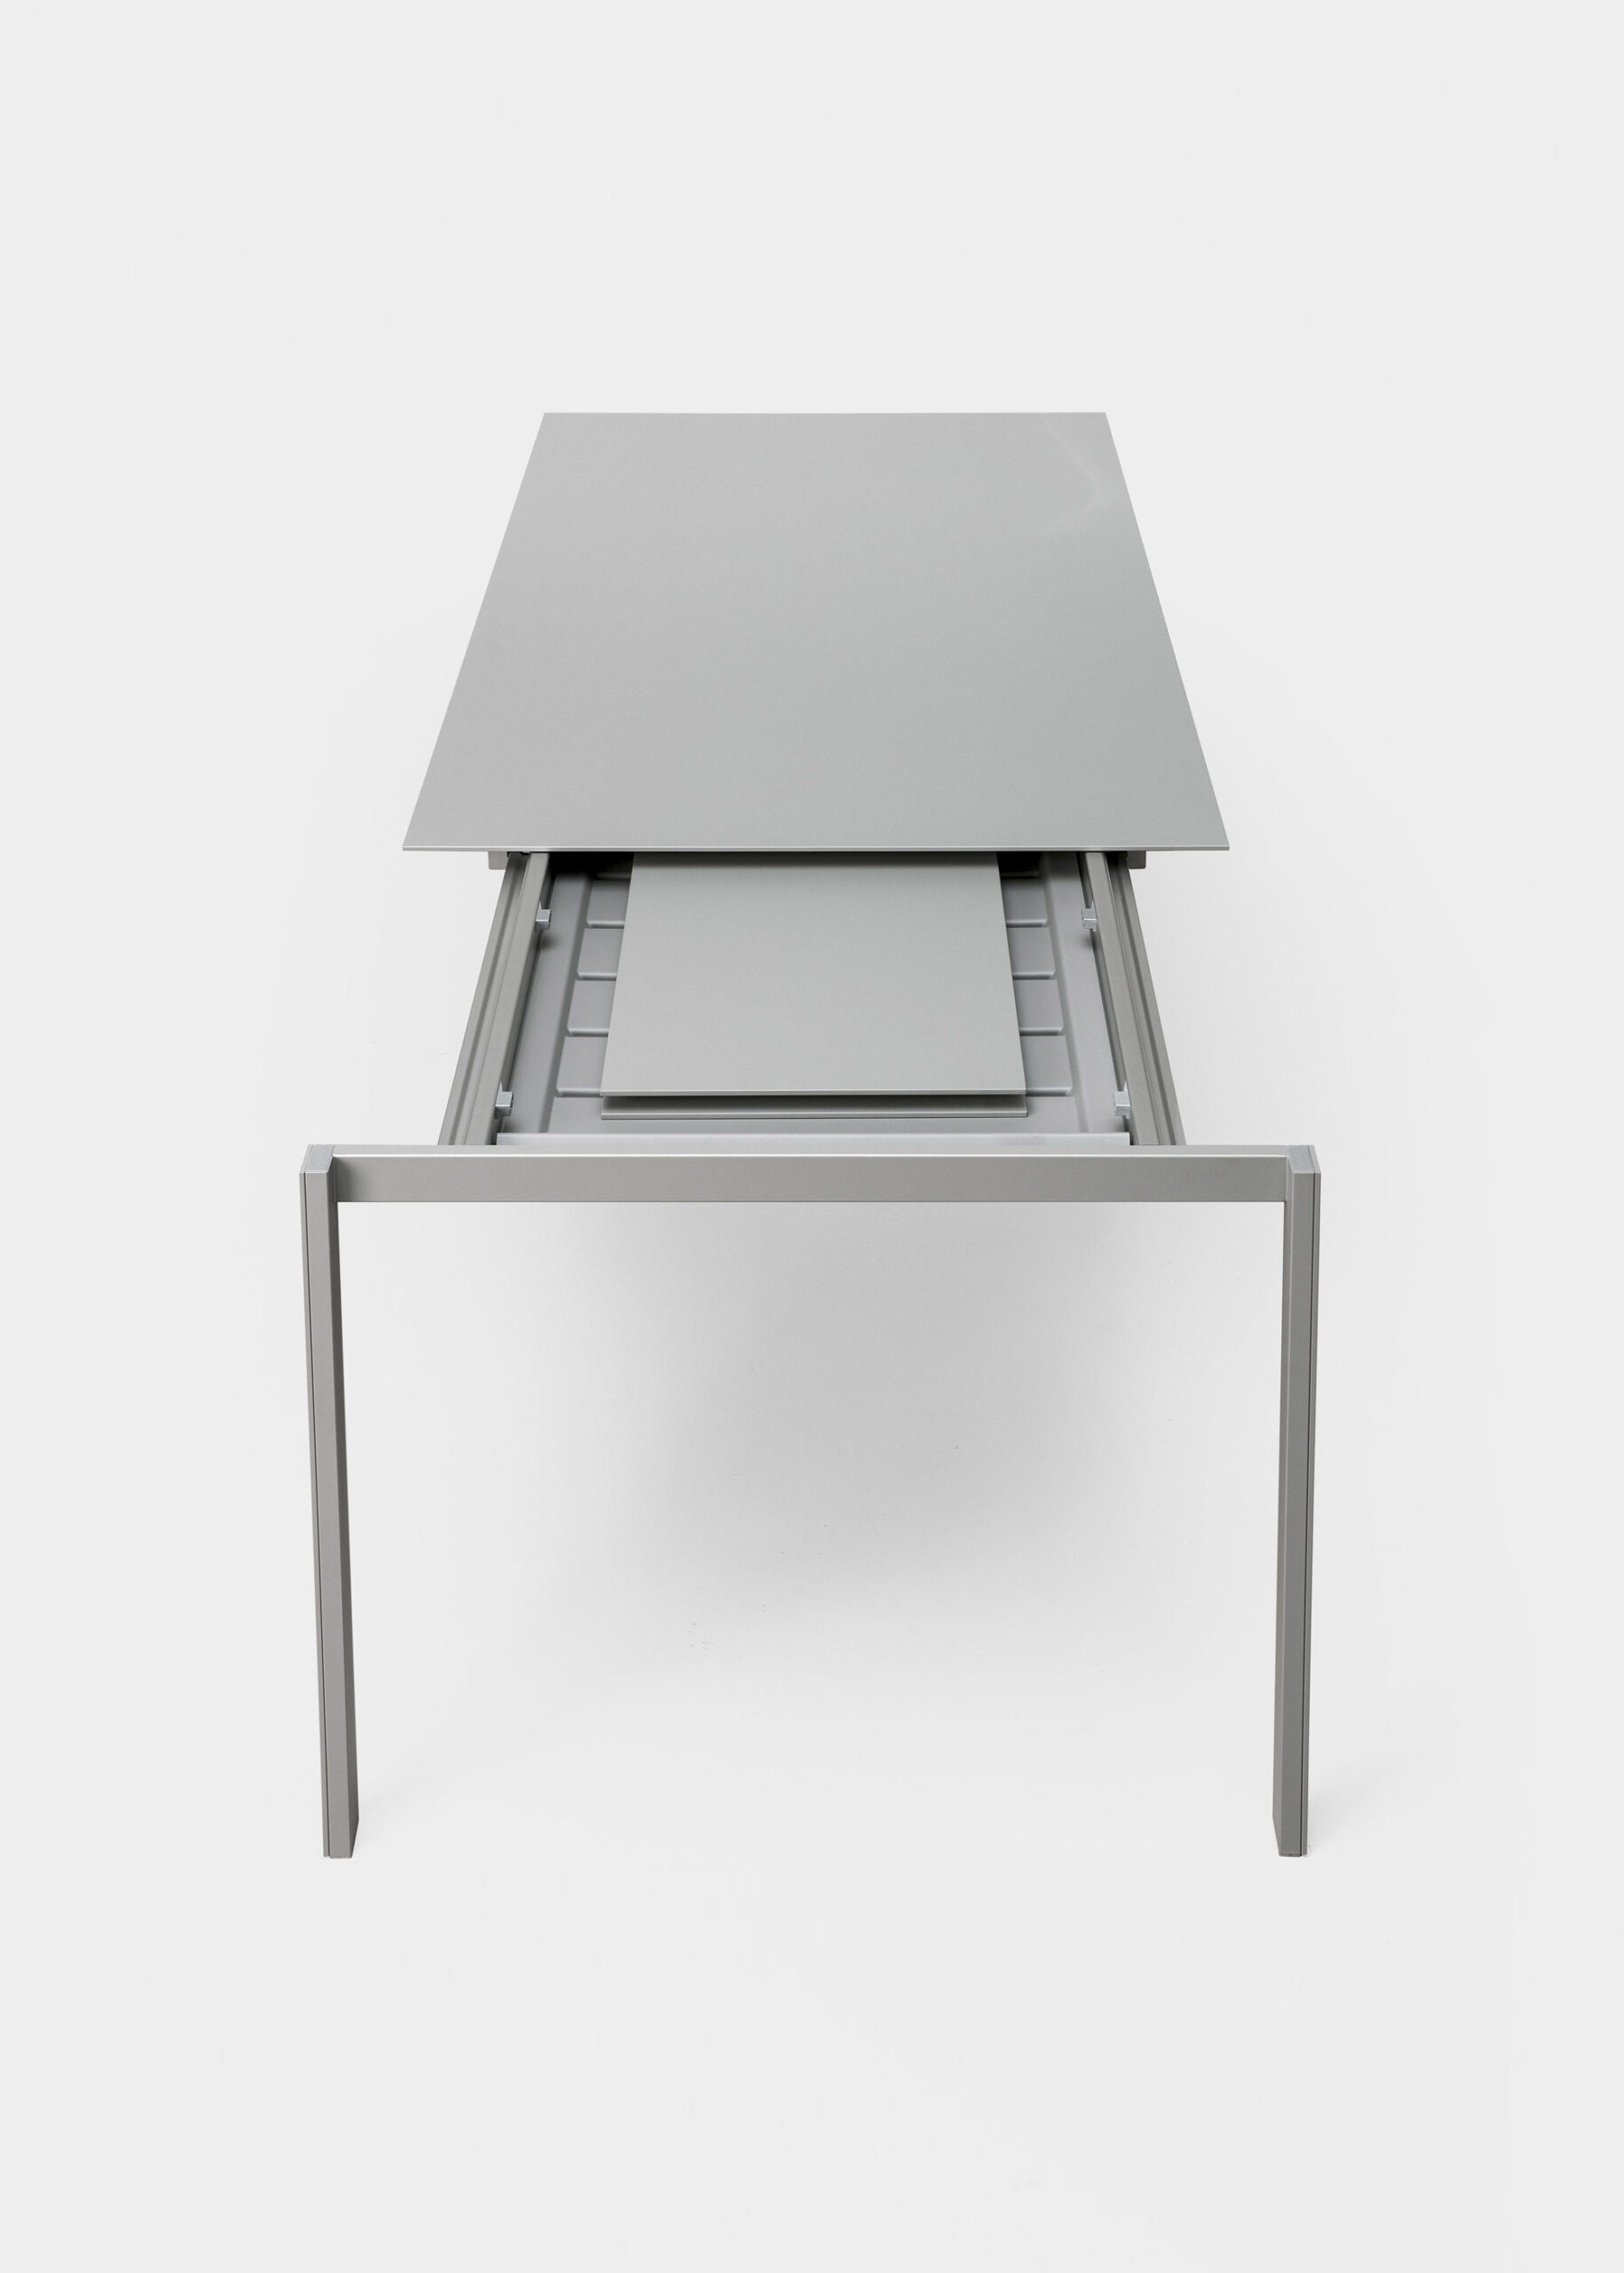 Thin-K Table by Luciano Bertoncini in grey